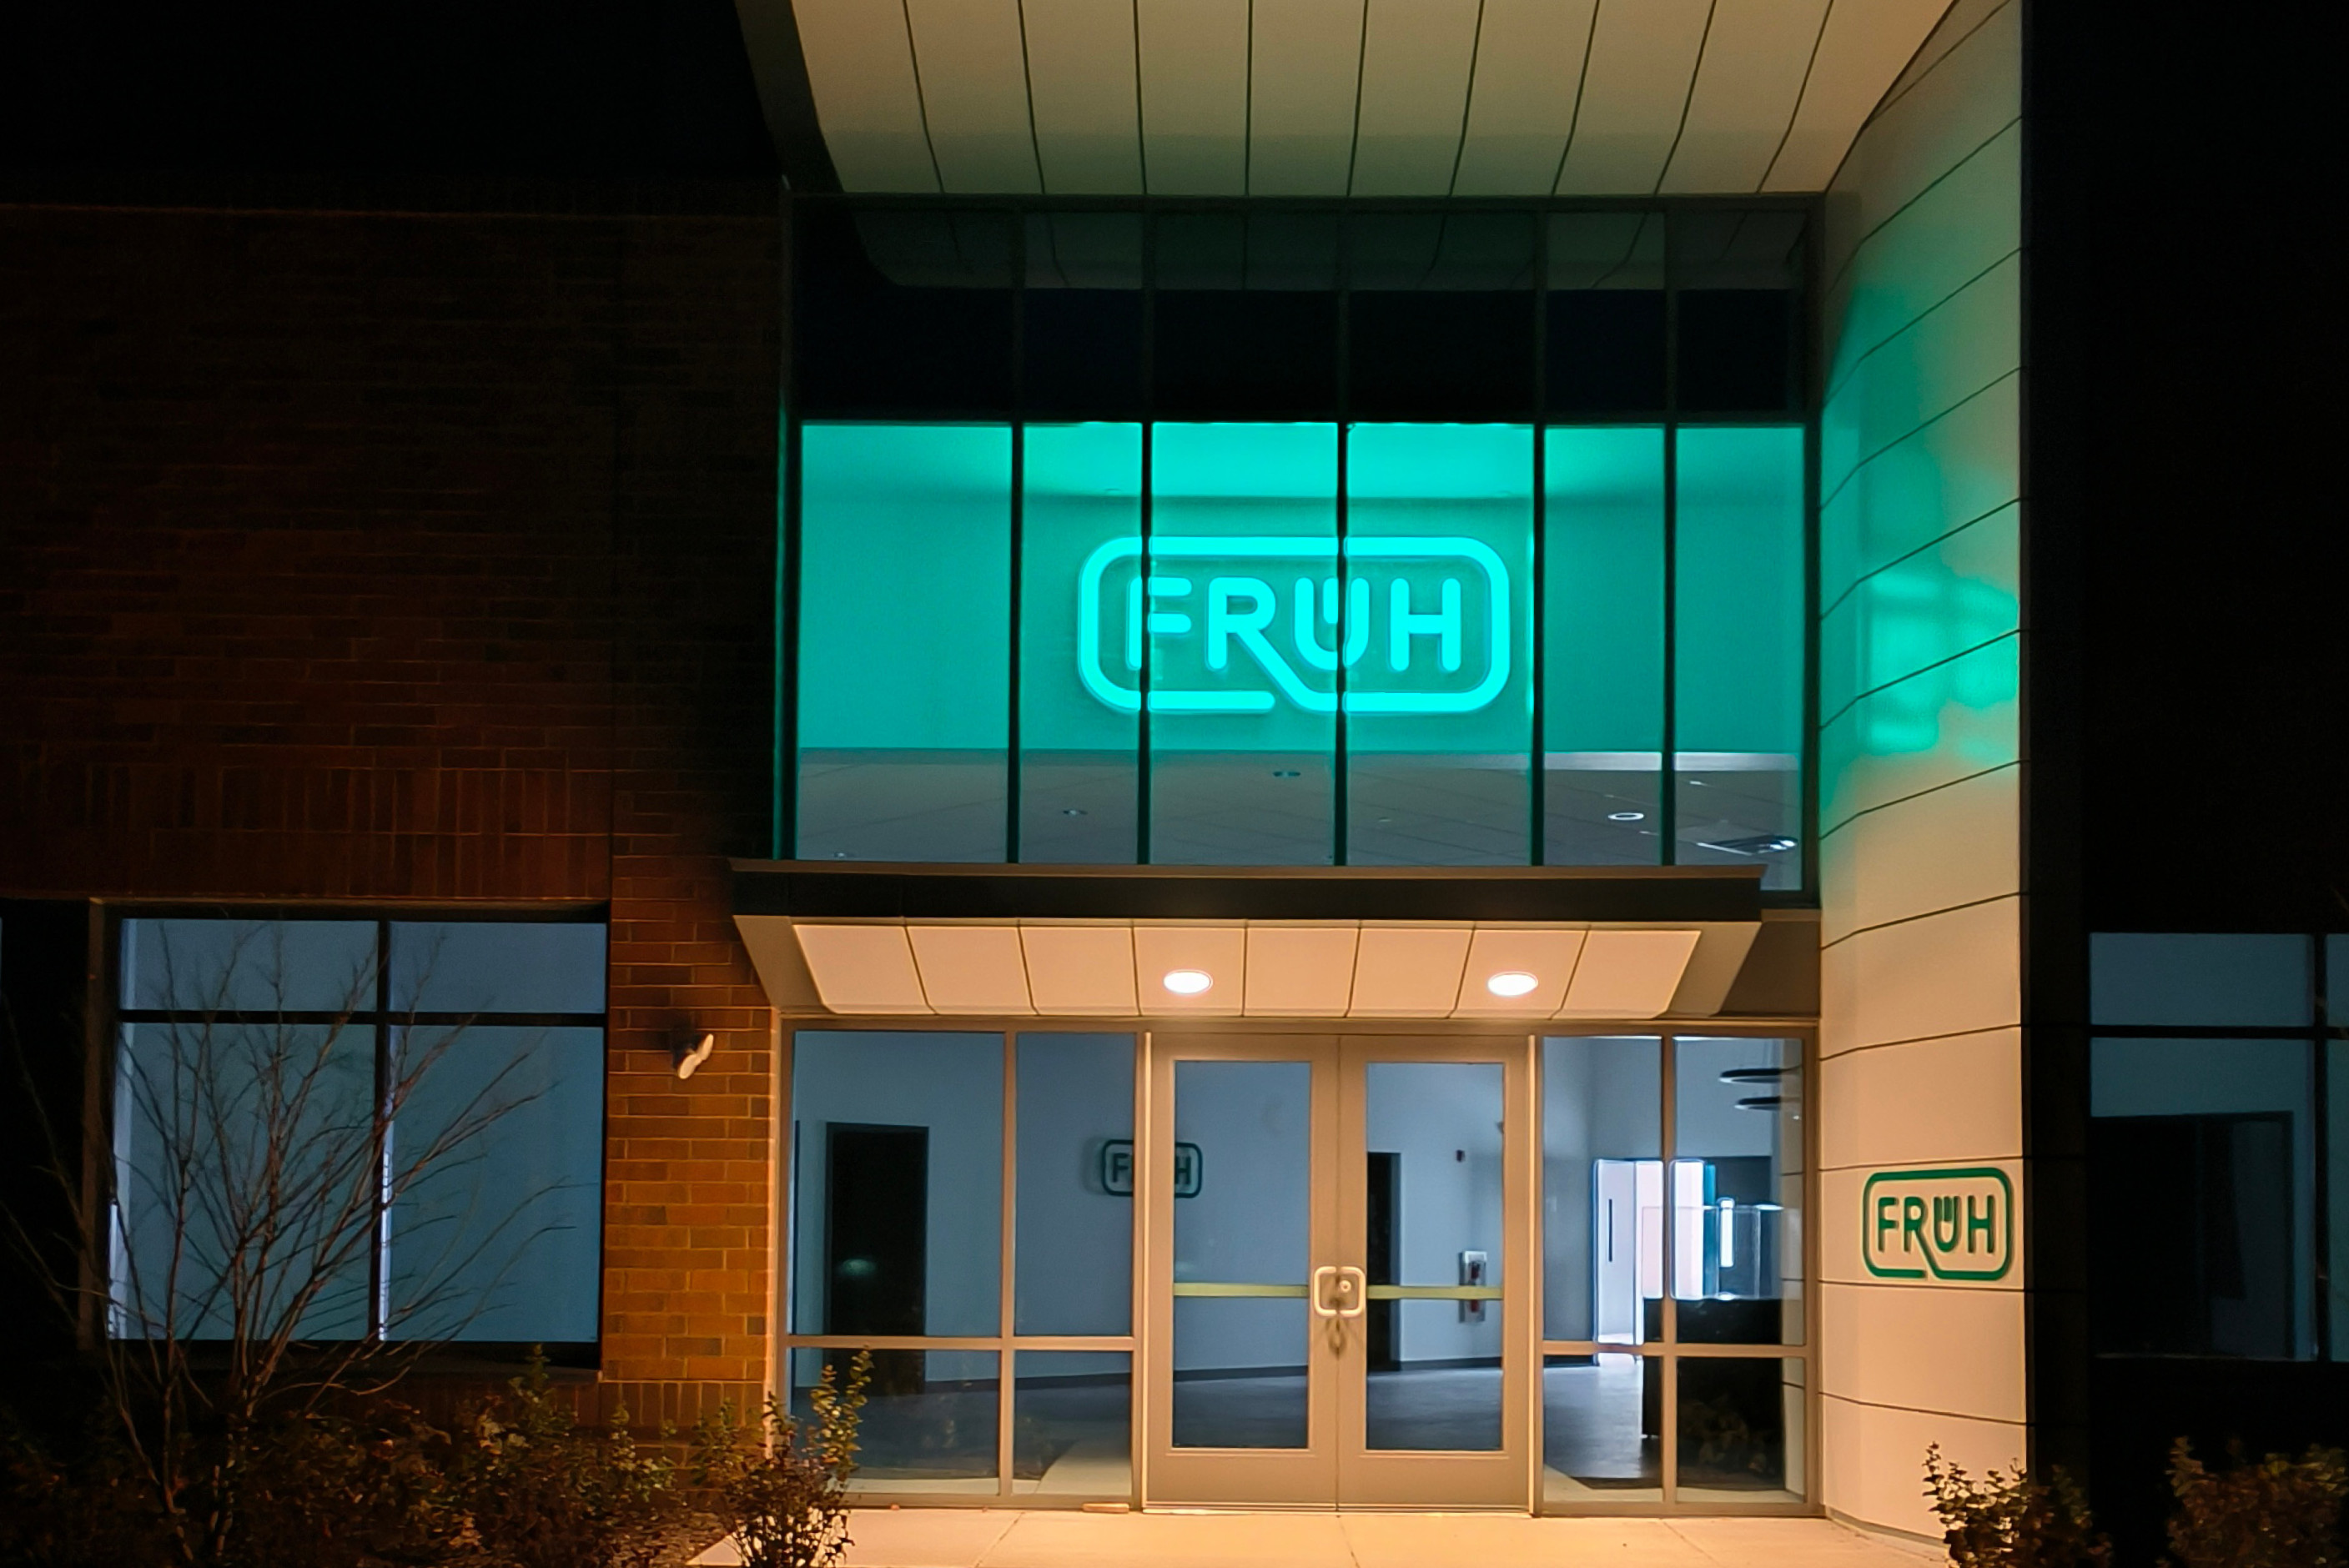 Fruh entrance by night